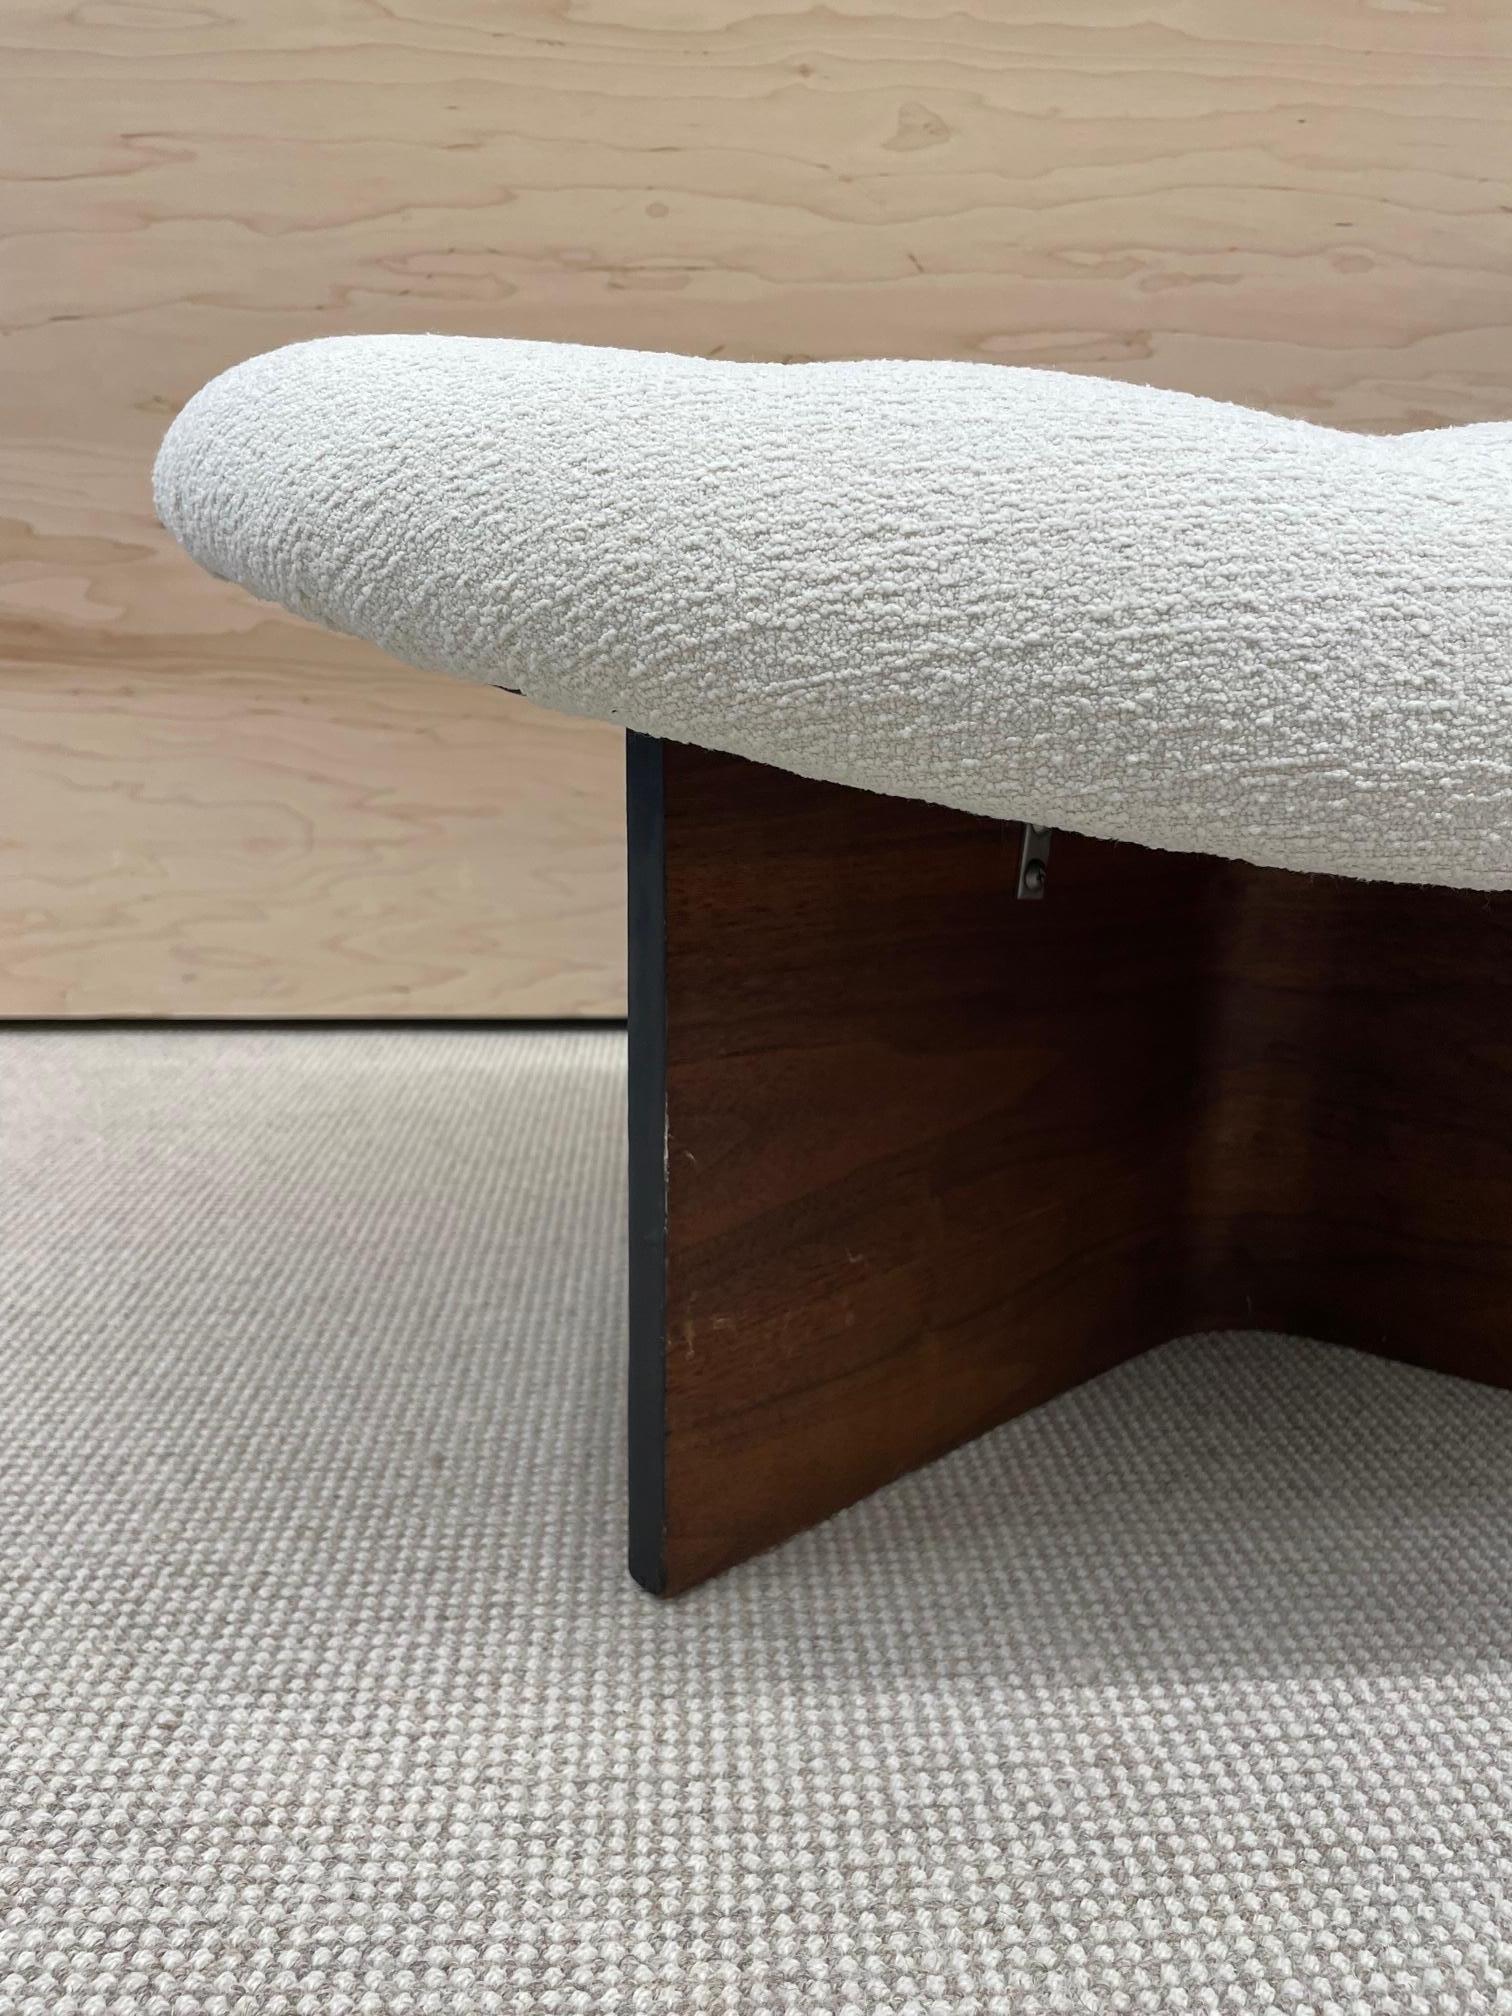 Mid-Century Modern, Footstool, White Boucle, Walnut, United States, 1960s For Sale 1